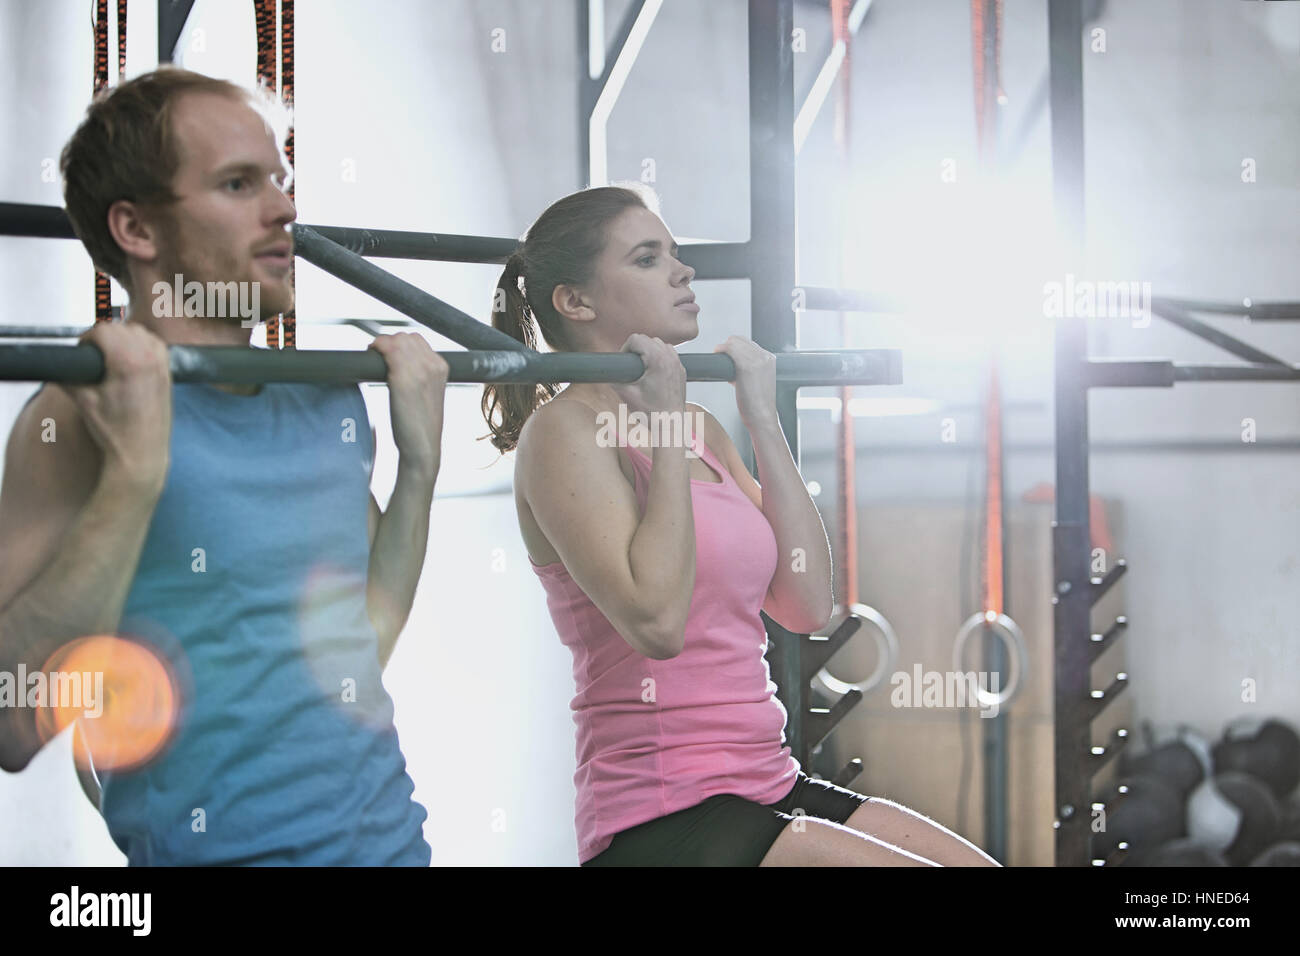 Man and woman doing pull ups in crossfit gym Stock Photo